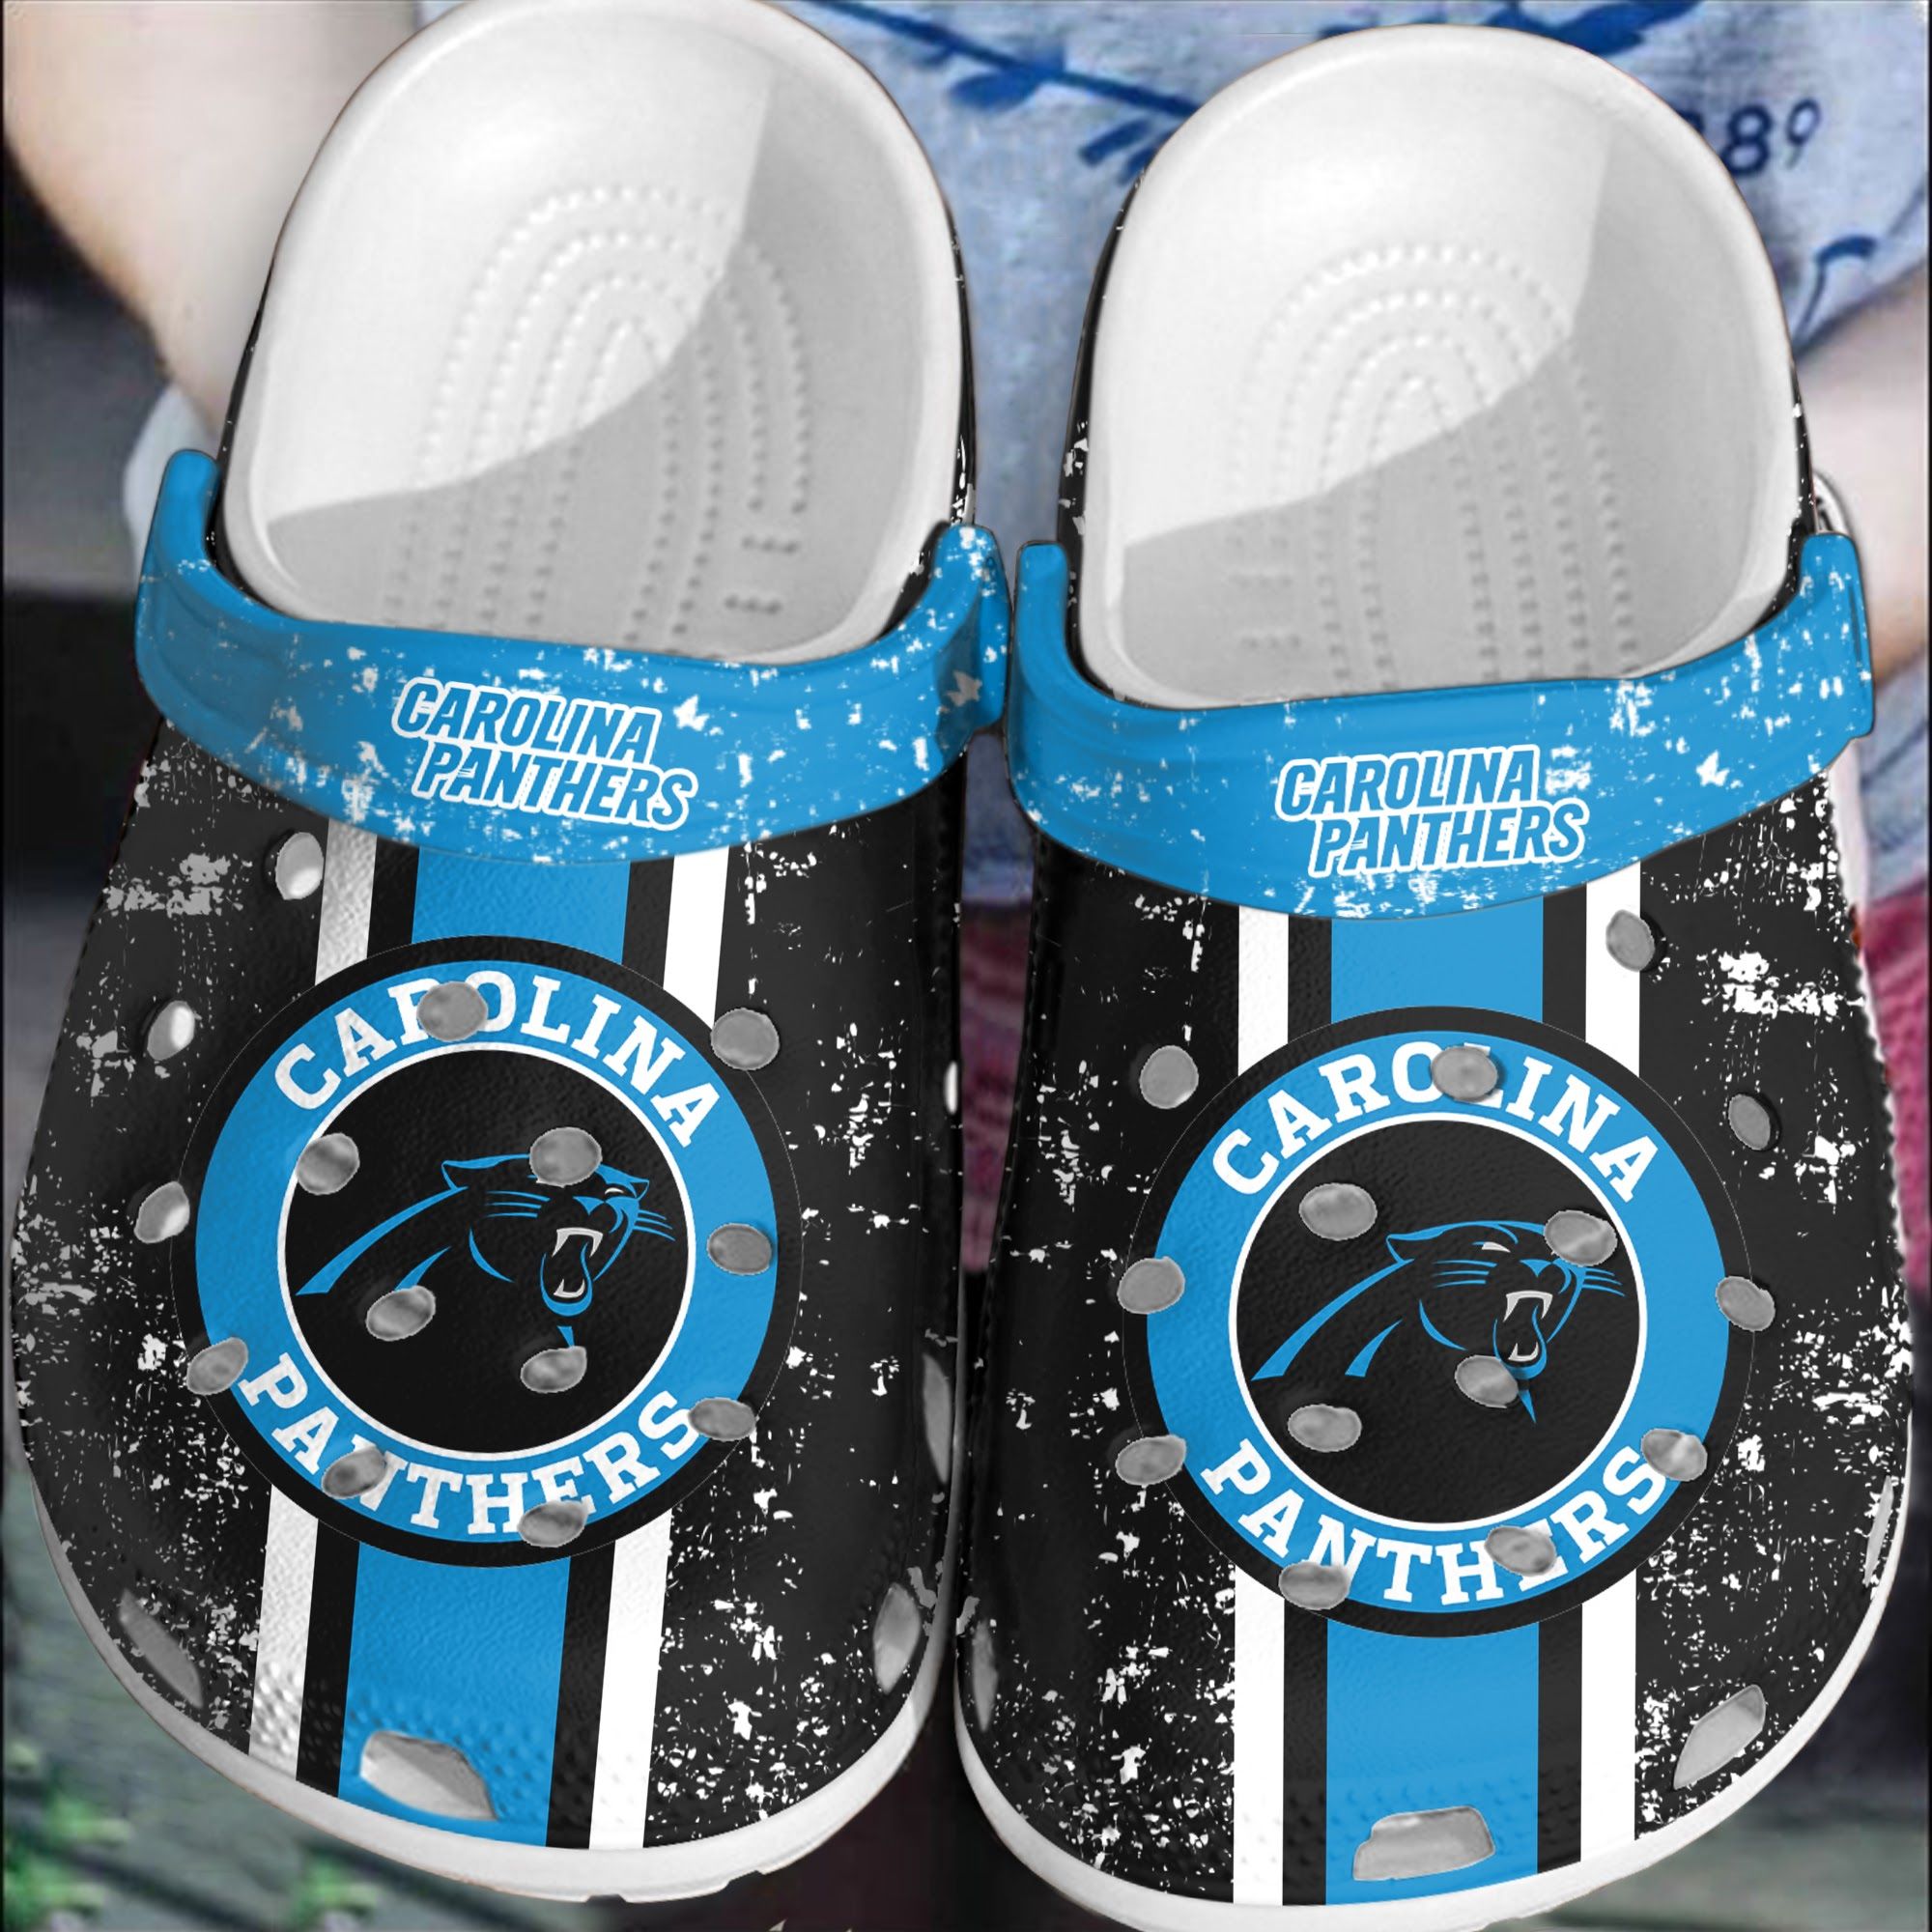 If you'd like to purchase a pair of Crocband Clogs, be sure to check out the official website. 54